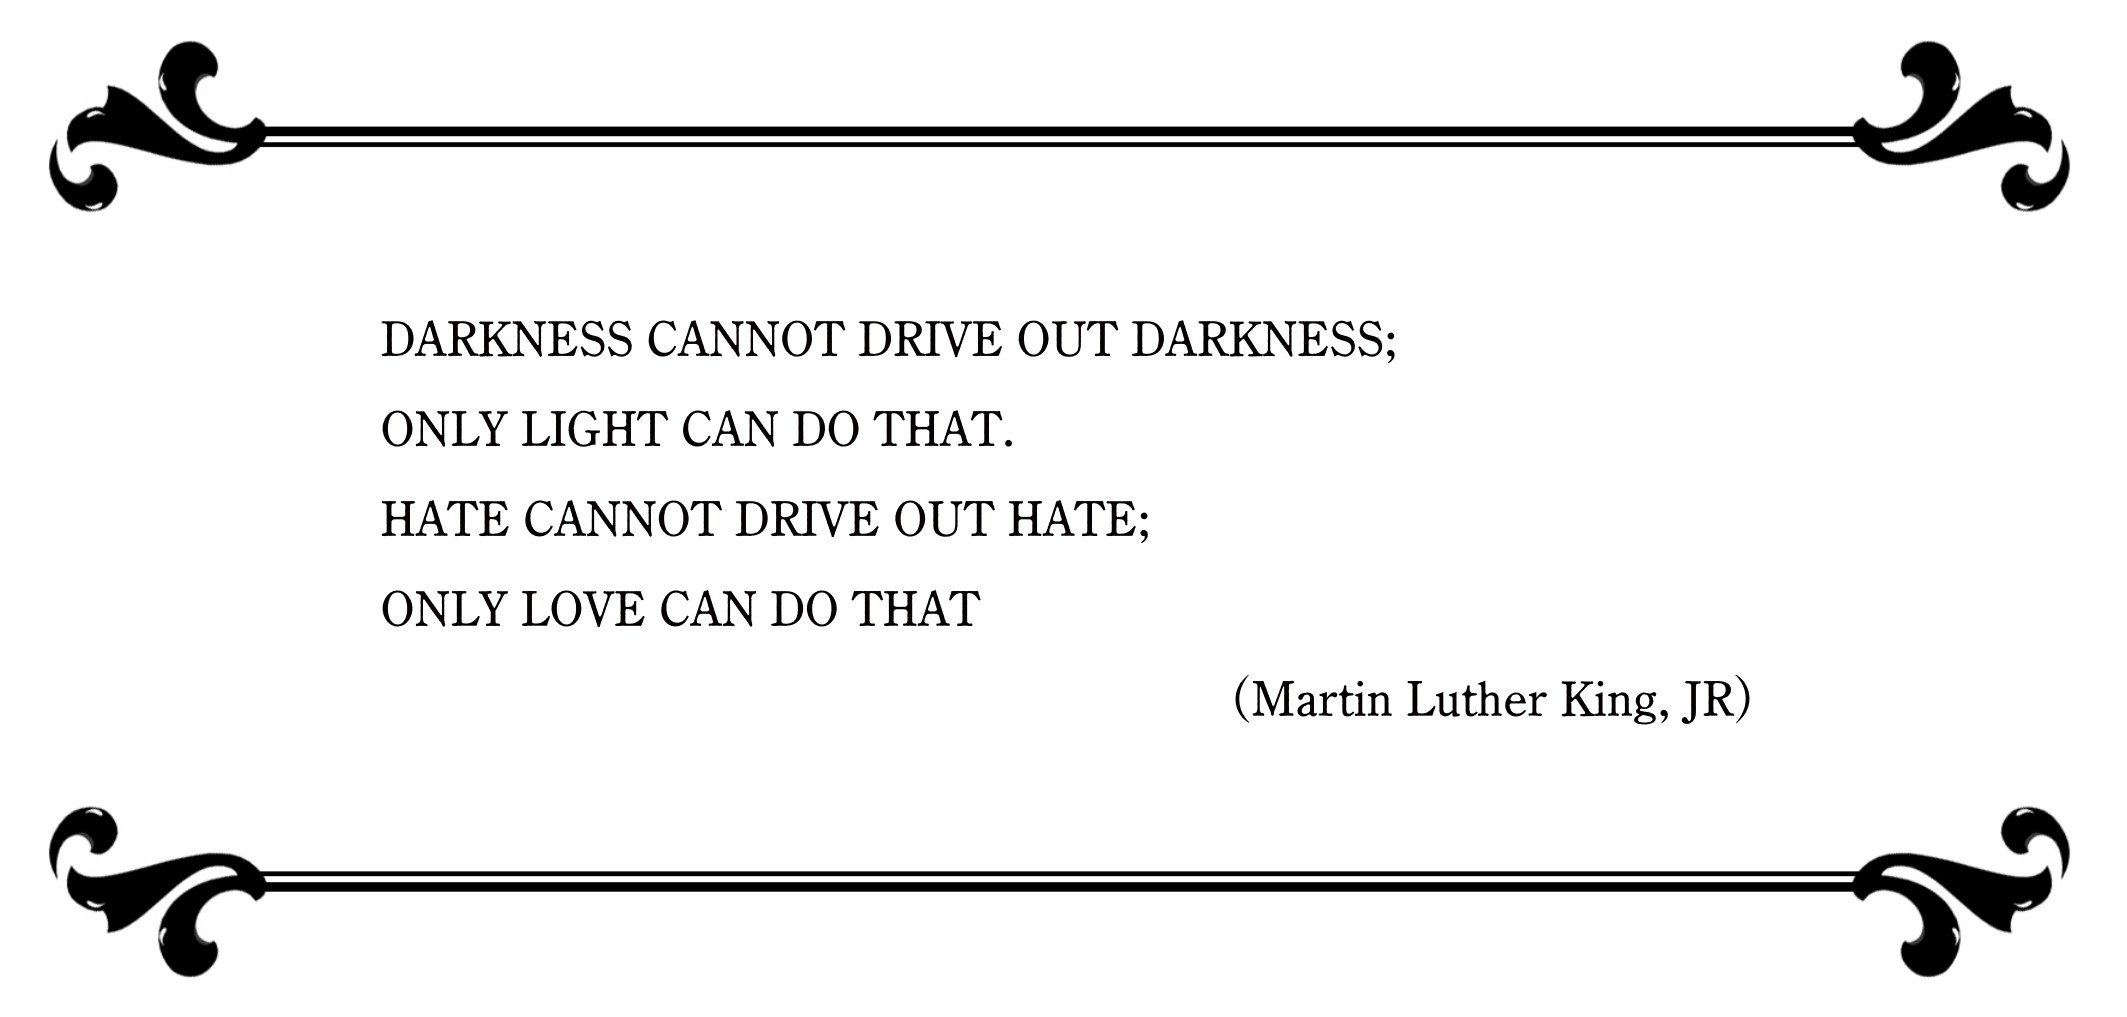 Martin Luther King, JR